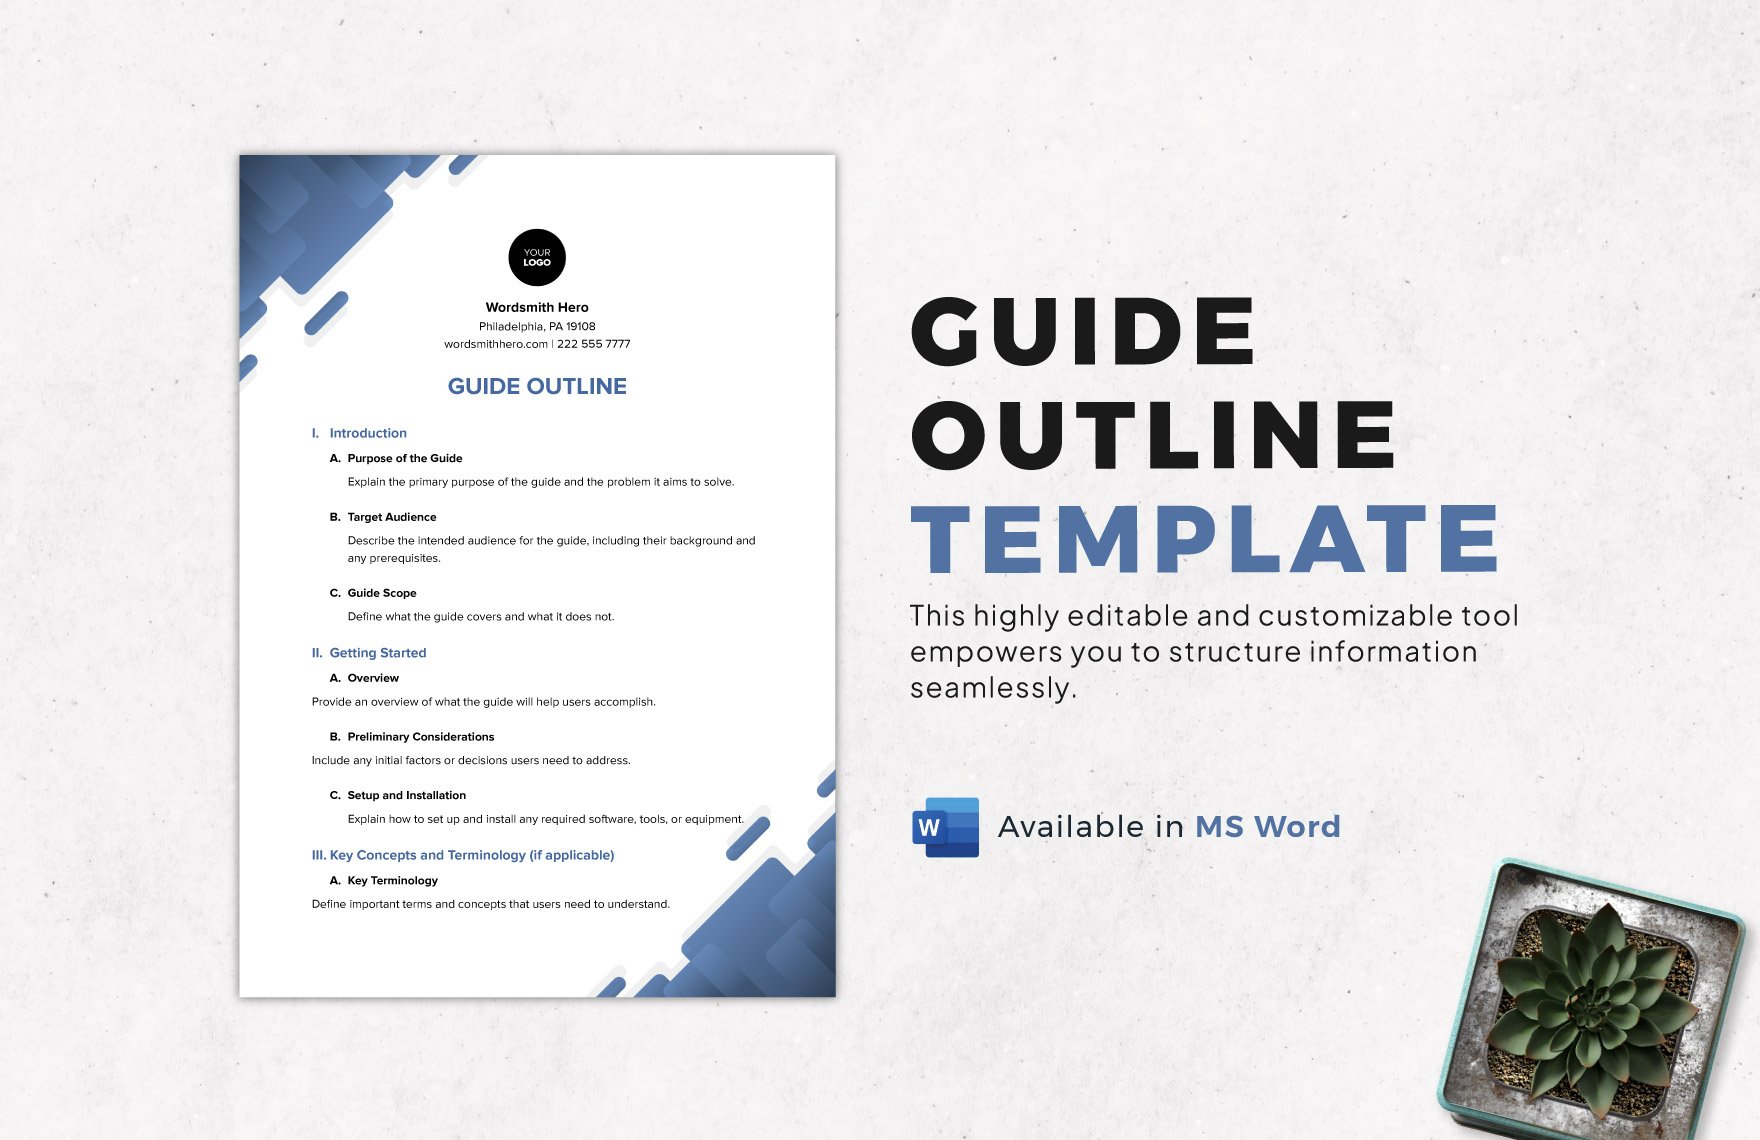 Guide Outline Template in Word